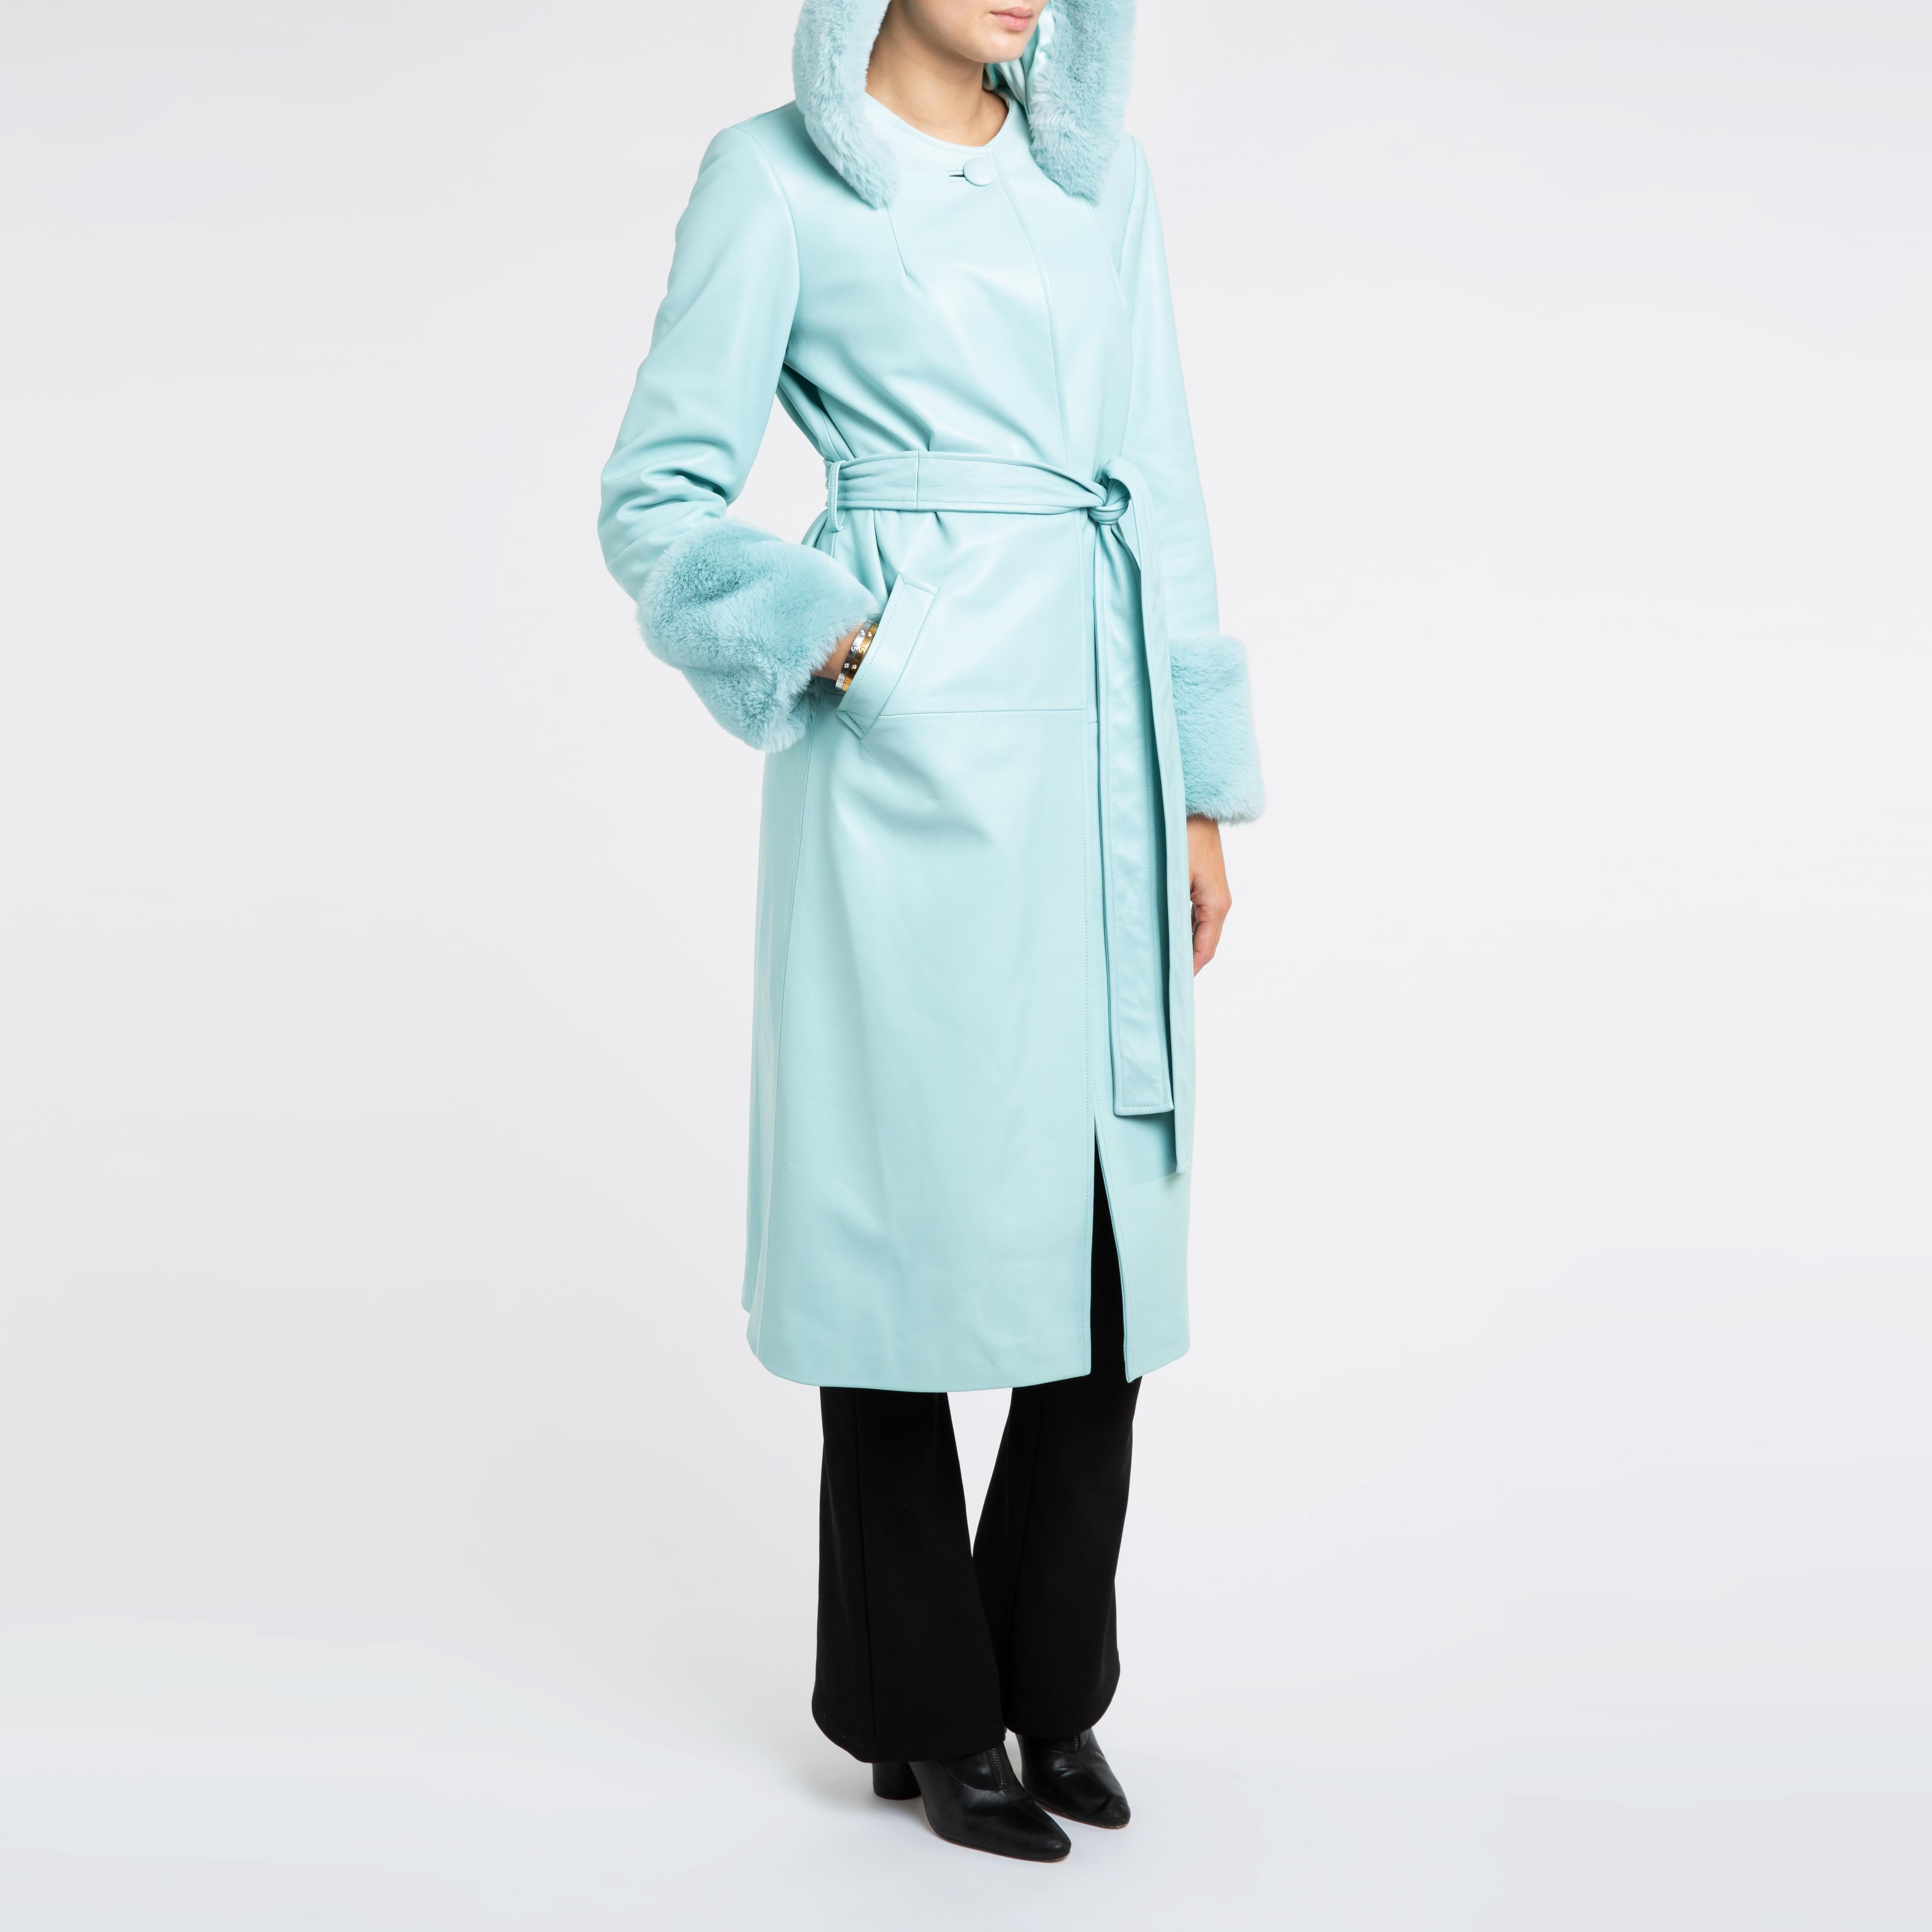 Verheyen London Hooded Leather Trench Coat in Blue with Faux Fur - Size uk 16
Handmade in London, made with 100% Italian Lambs Leather and the highest quality of faux fur to match, this luxury item is an investment piece to wear for a lifetime. 